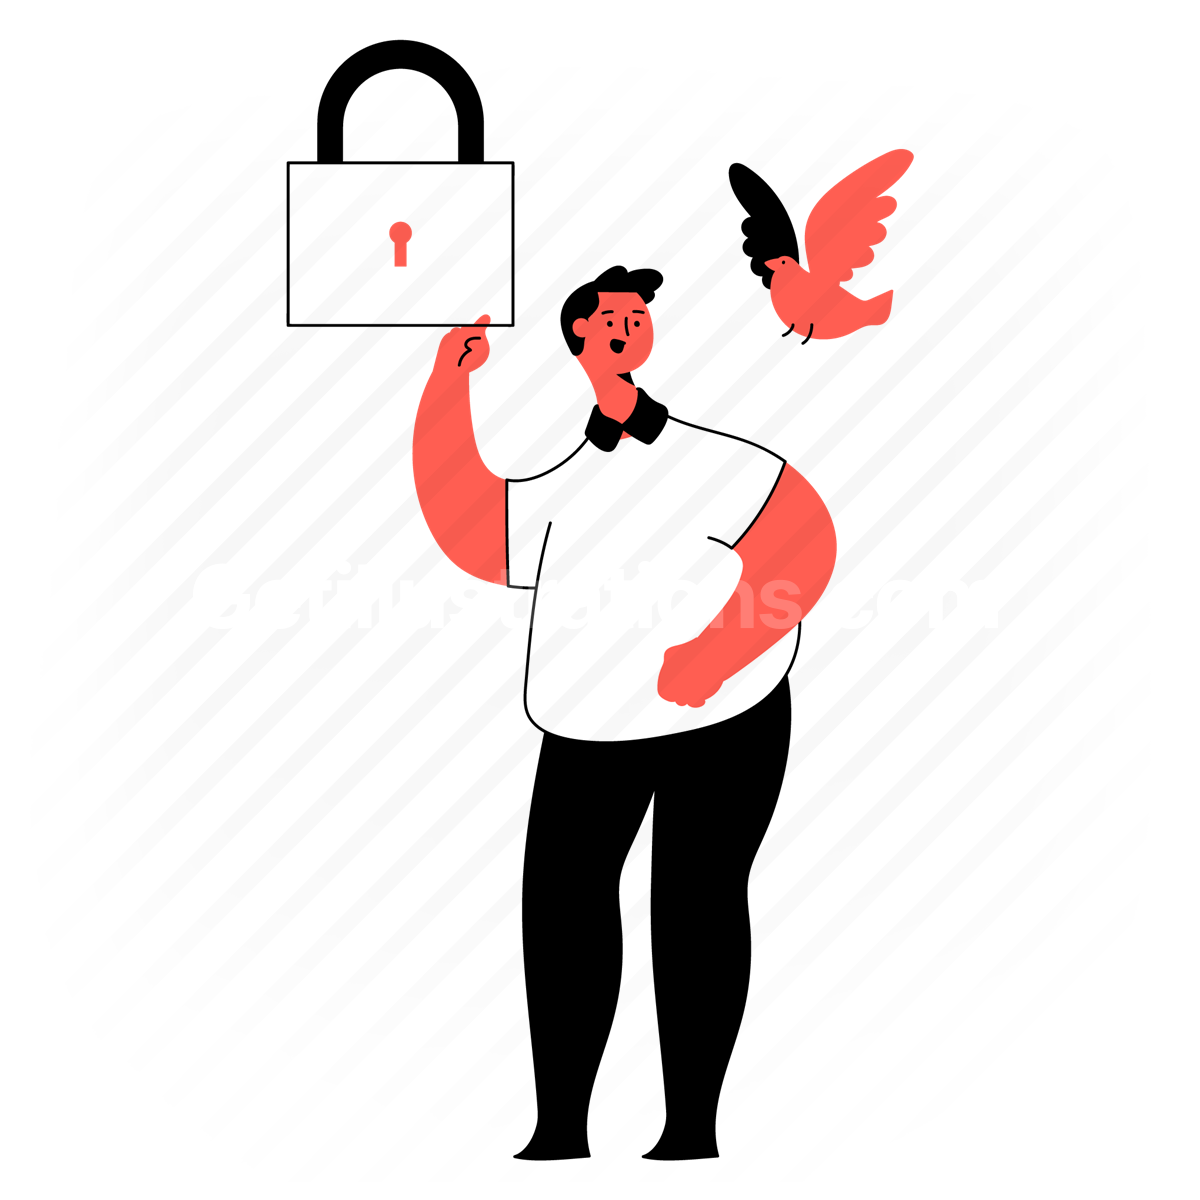 Security and Privacy illustration